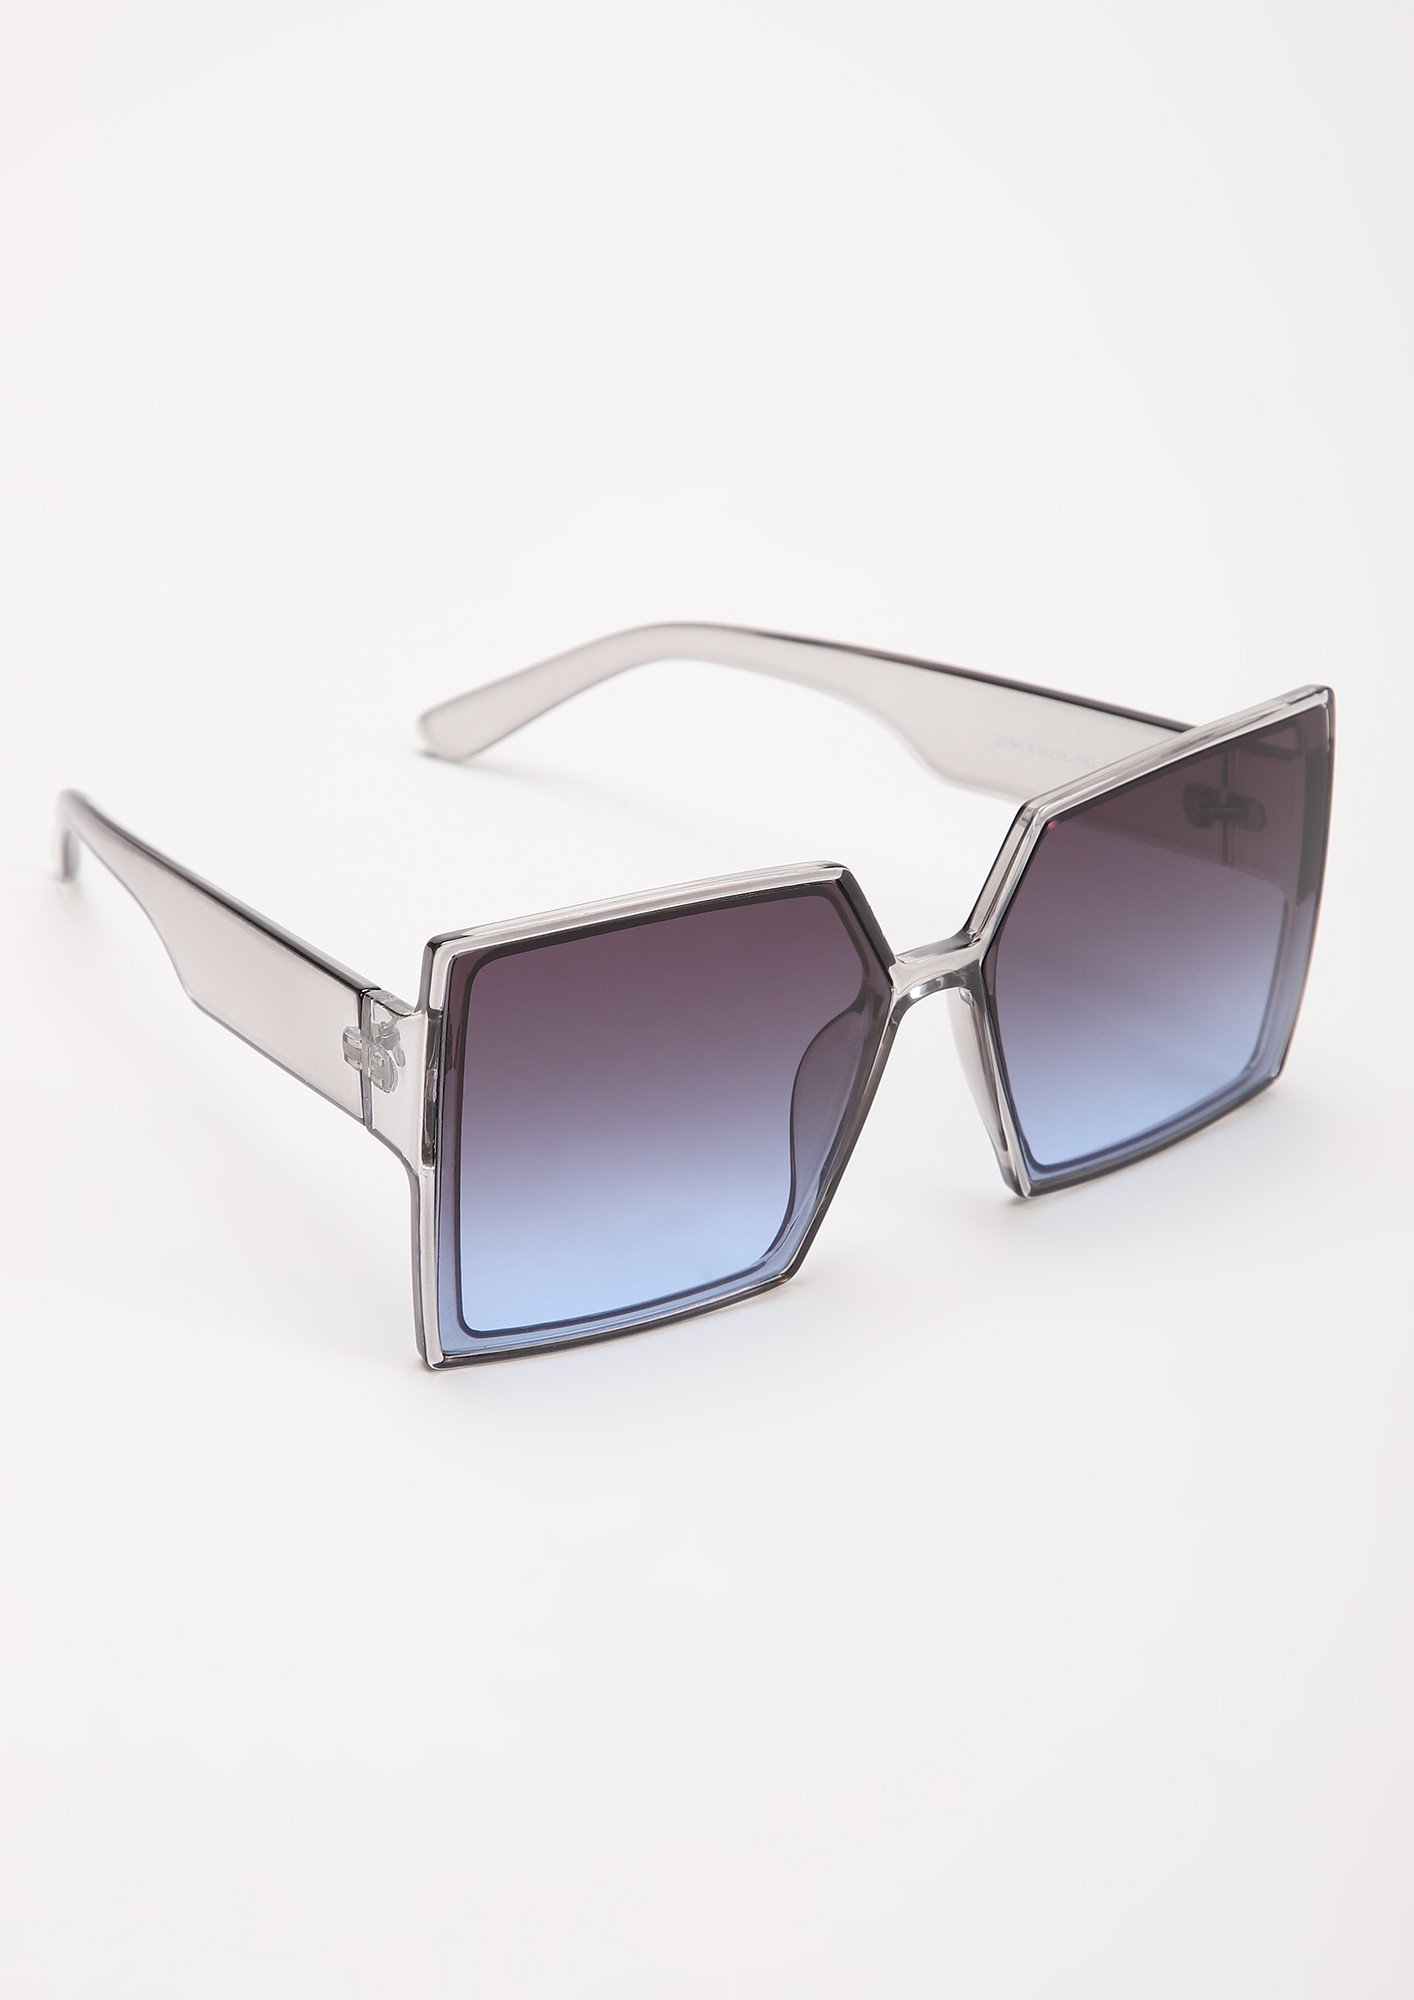 Buy Combo Of Sunglasses Online In India At Discounted Prices